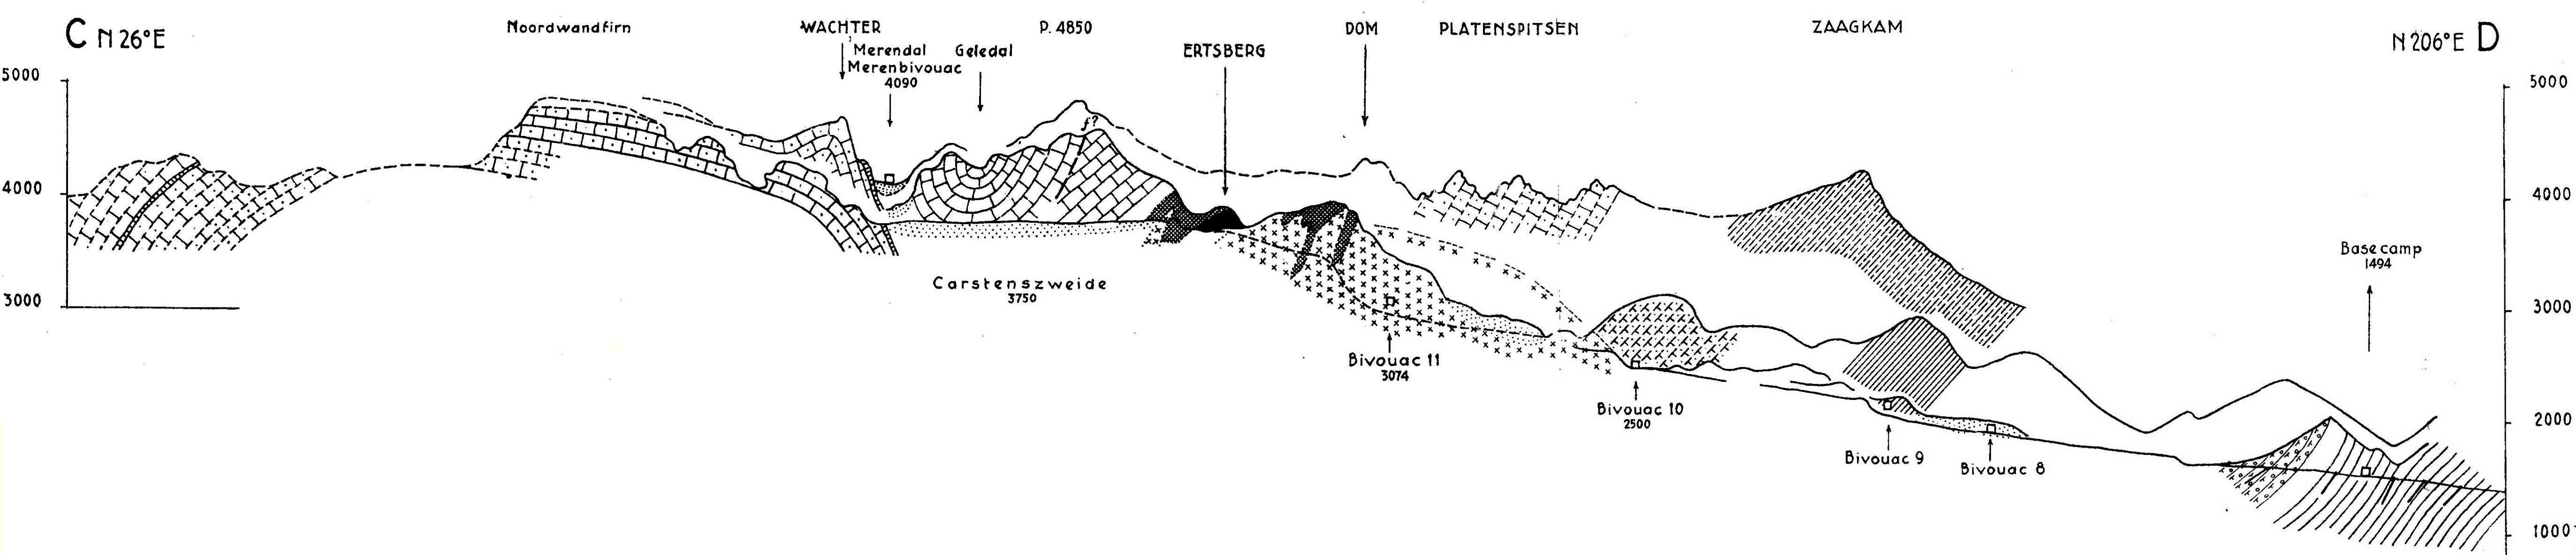 N-S x-section of W (highest) part of the Central Range, showing peaks up to 5000m elevation composed of folded Eocene-Oligocene New Guinea Limestone, and the large exposed Ertsberg ('copper mountain') porphyry copper deposit at about 4000m. The lower areas are composed of Paleozoic- Mesozoic clastics and carbonates (Dozy, 1939). 